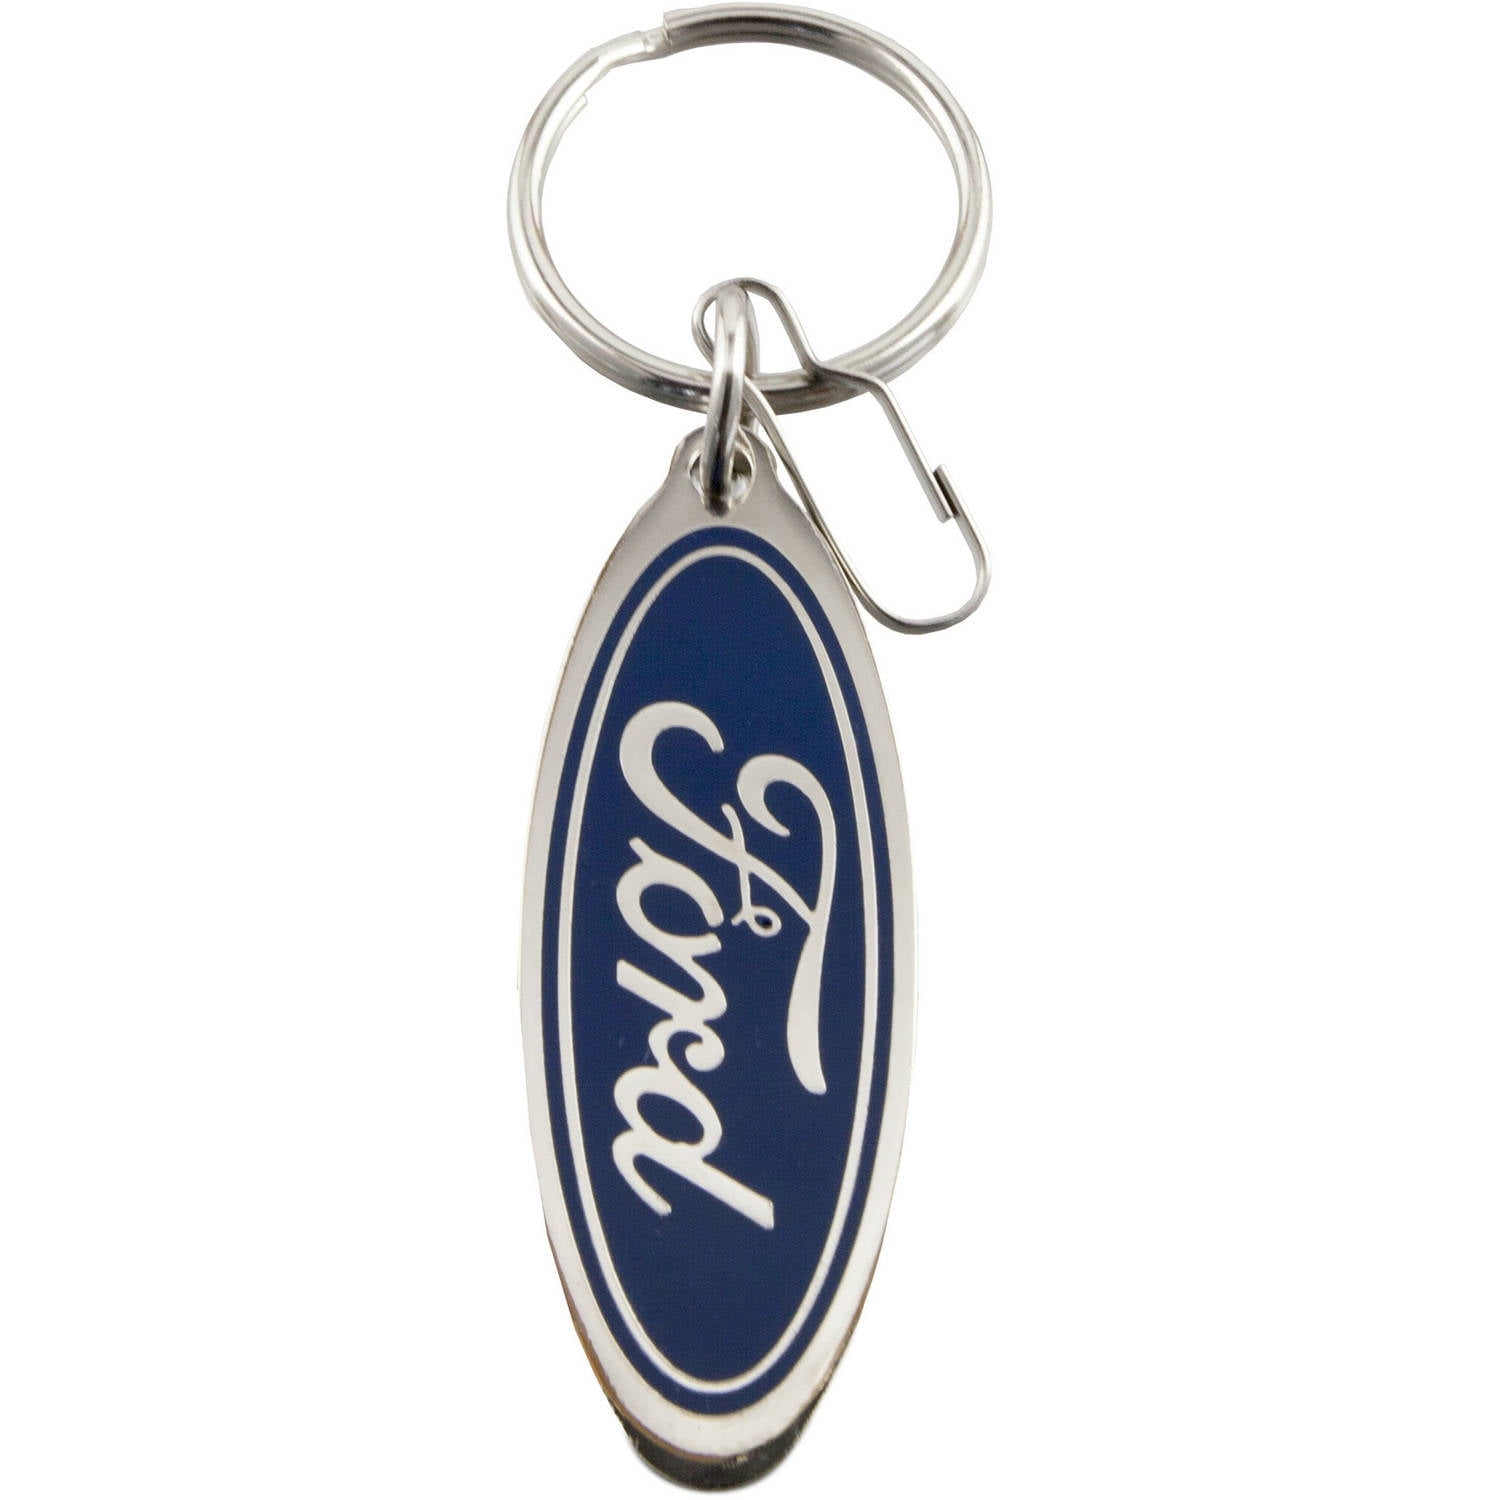 1974 FORD KEYCHAIN 2 PACK CLASSIC TRUCK AND CAR  LOGO 